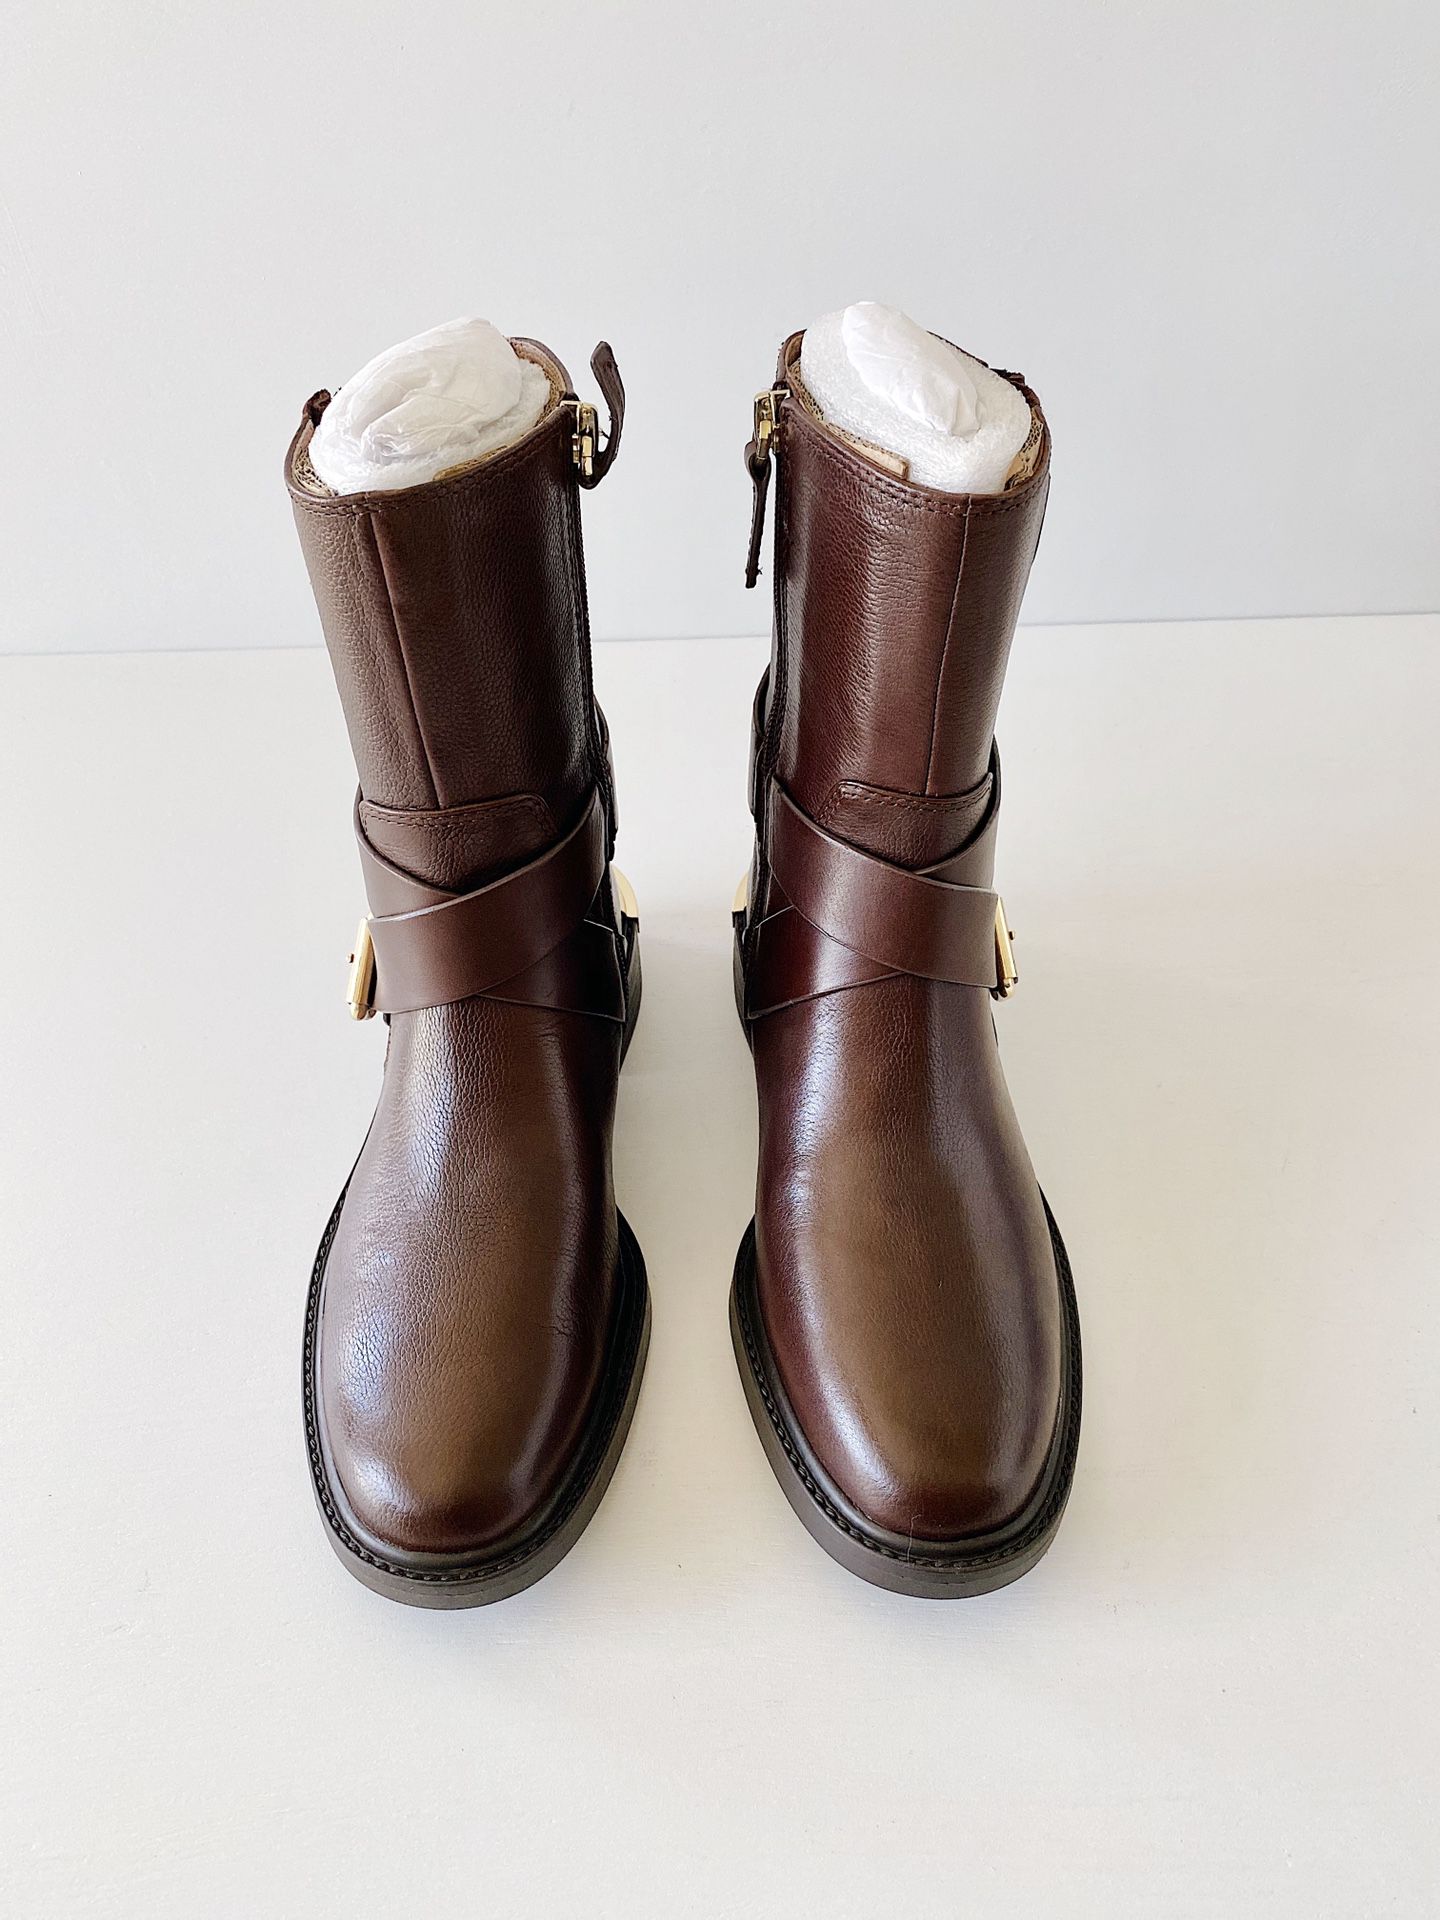 New LOUISE ET CIE Tandy Moto Leather Boots Burnt Oak Womens Shoes Size 7M  for Sale in Sugar Land, TX - OfferUp